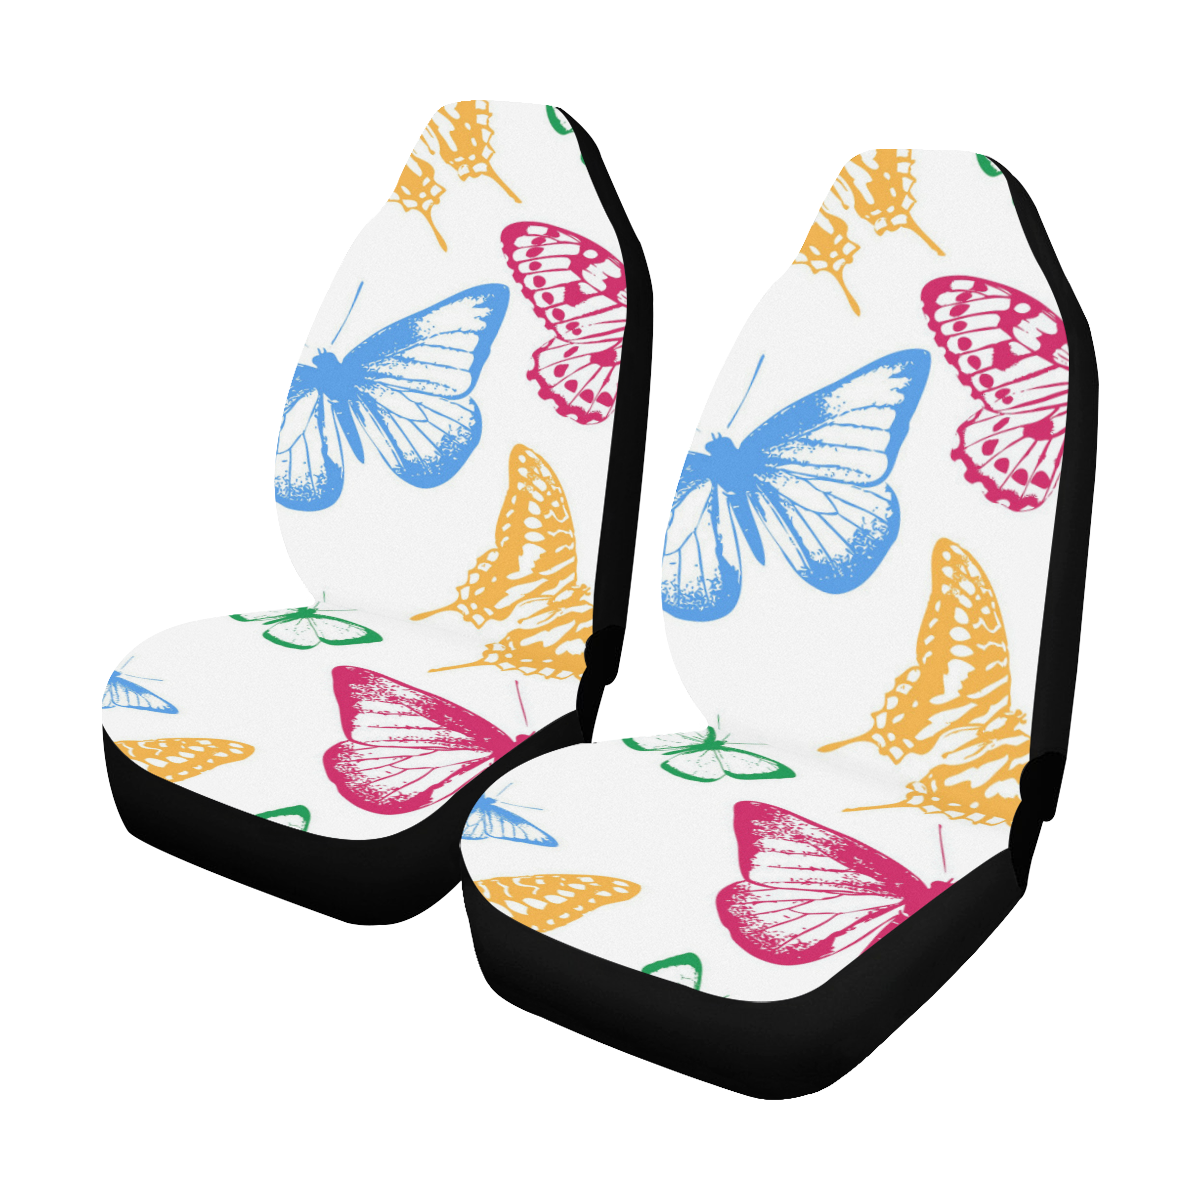 Colorful Butterflies Car Seat Covers (Set of 2)